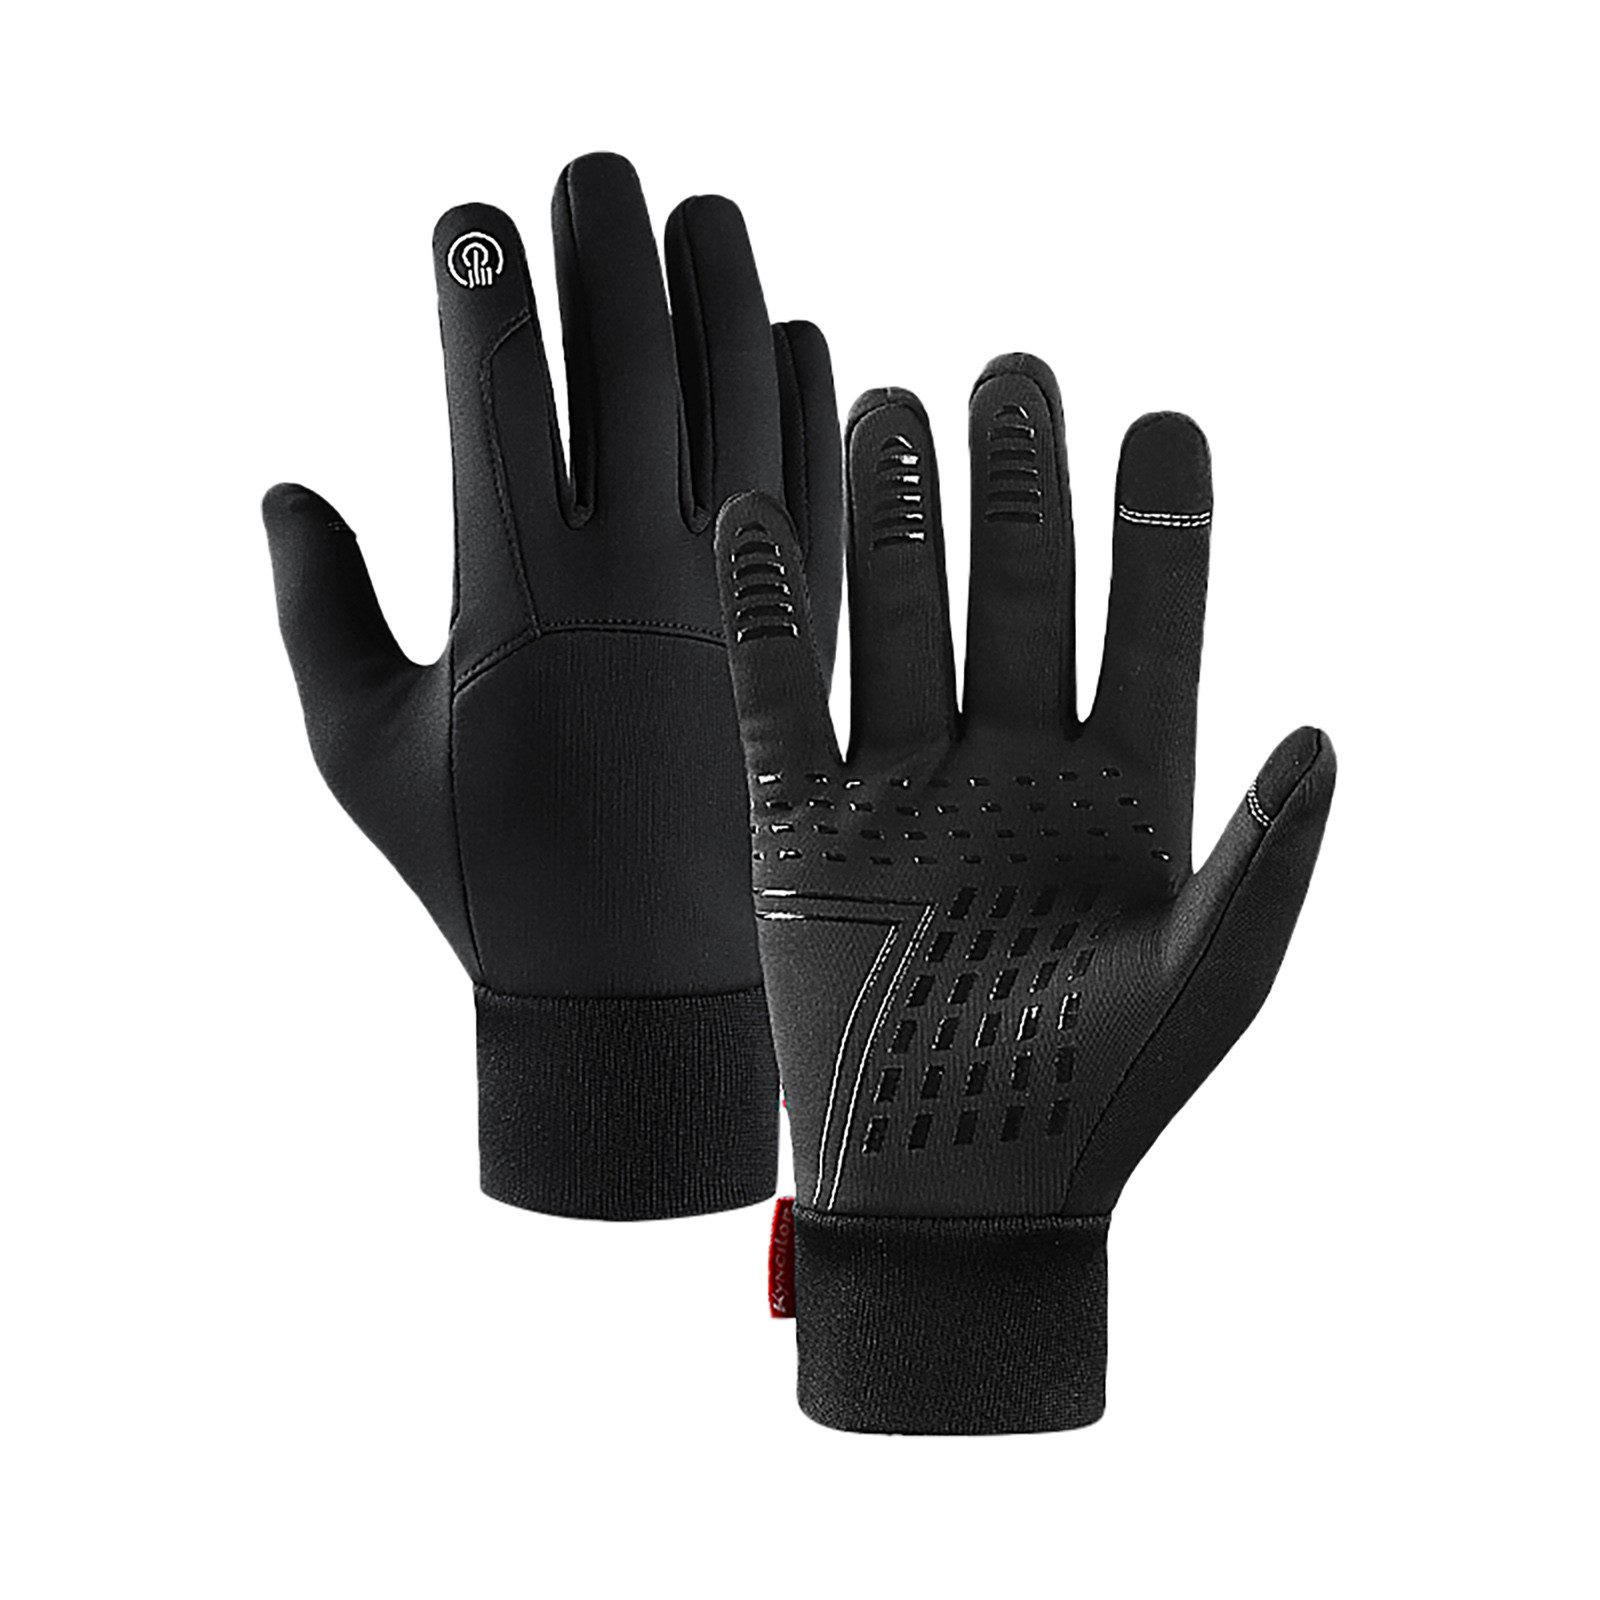 Winter Goves Mens Gloves Ladies Winter Accessories Running Gloves Thermo Touch screen full-finger windproof and warm glove